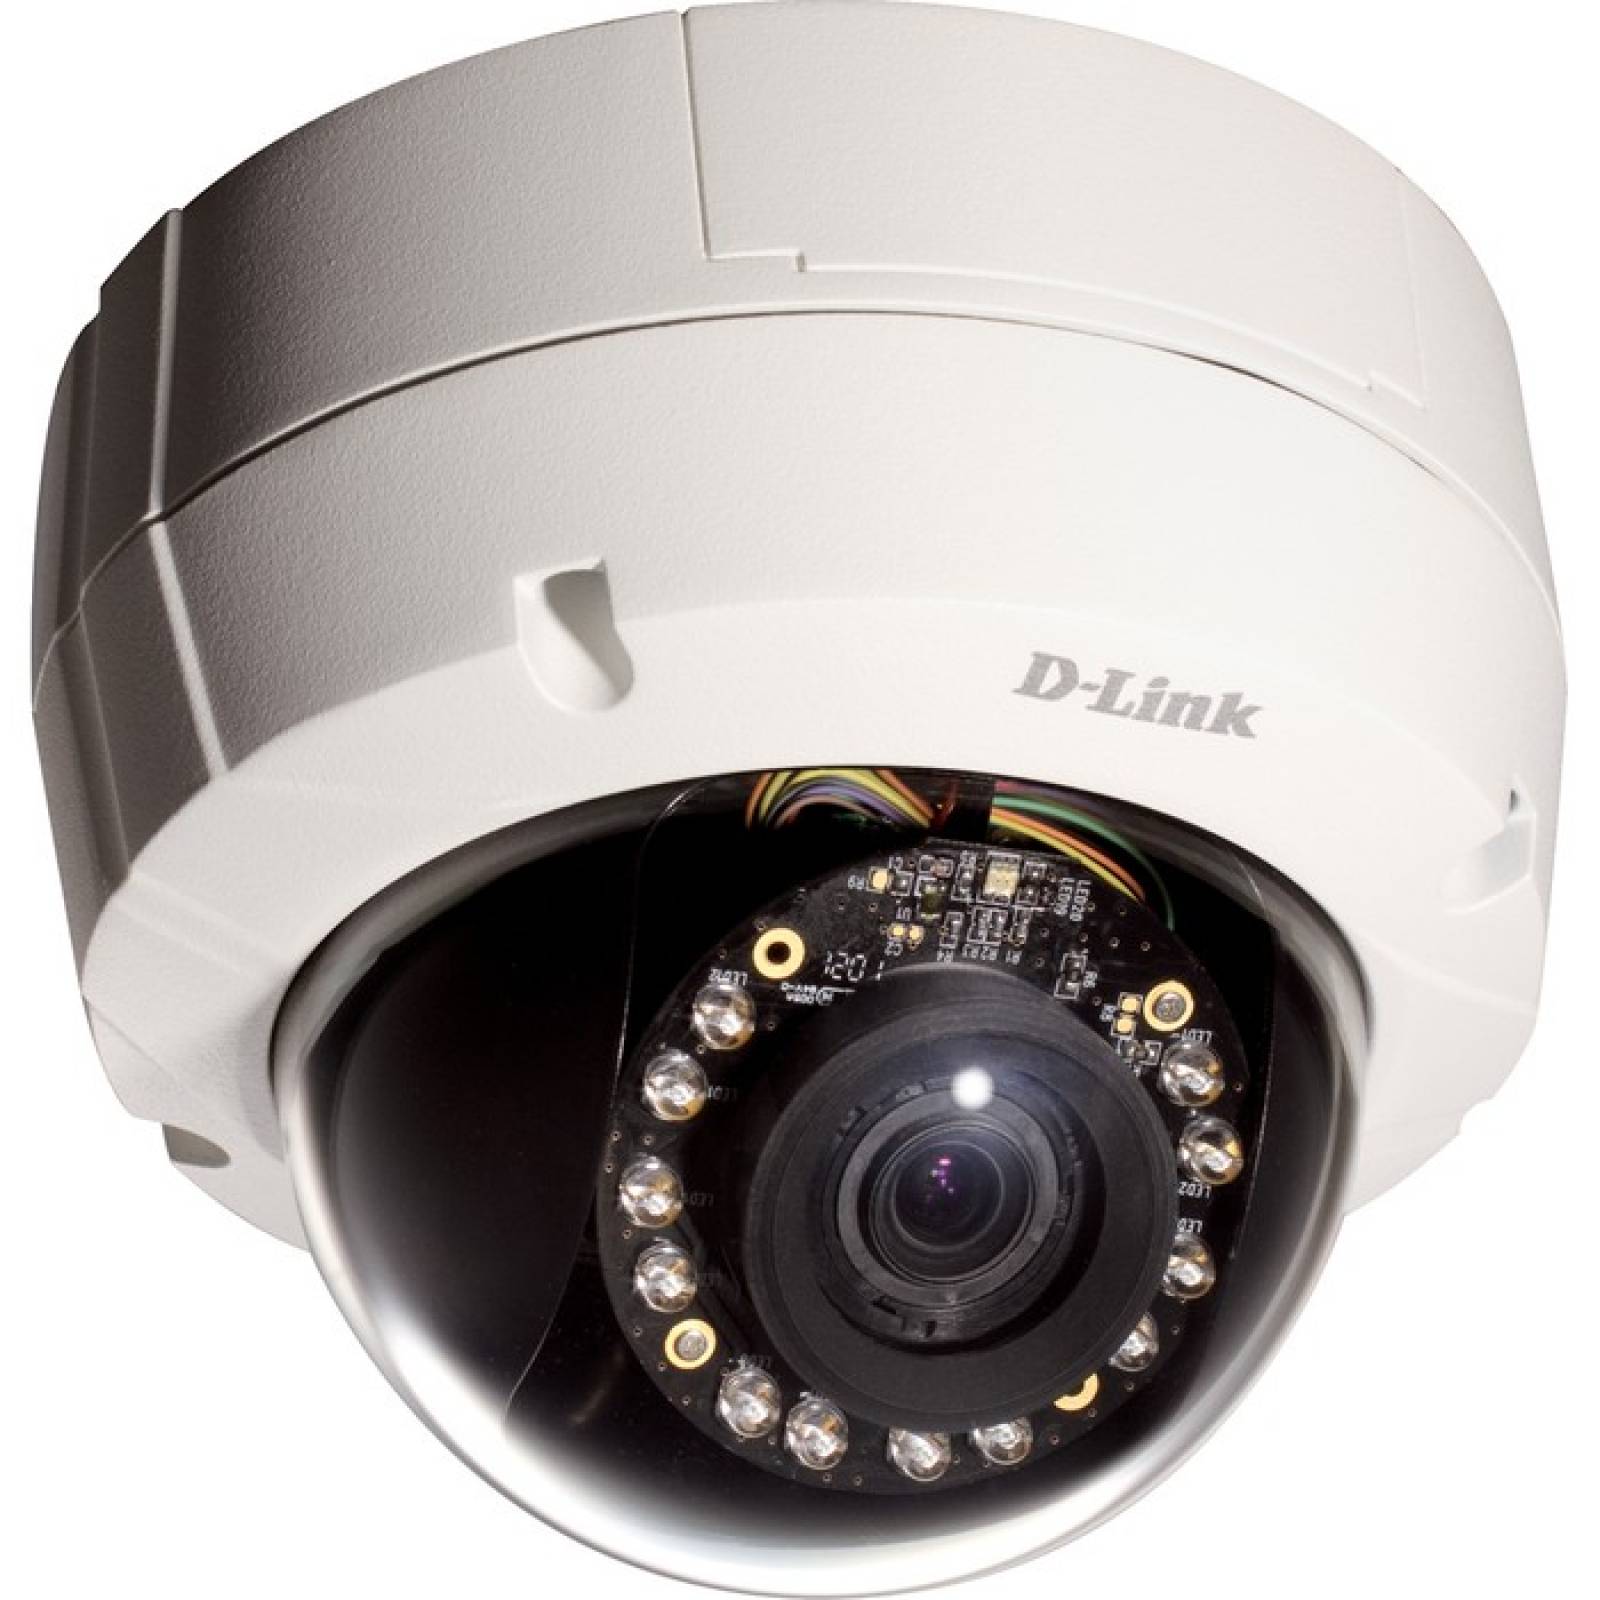 FULL HD WDR DAYNIGHT OUTDOOR  DOME CAMERA